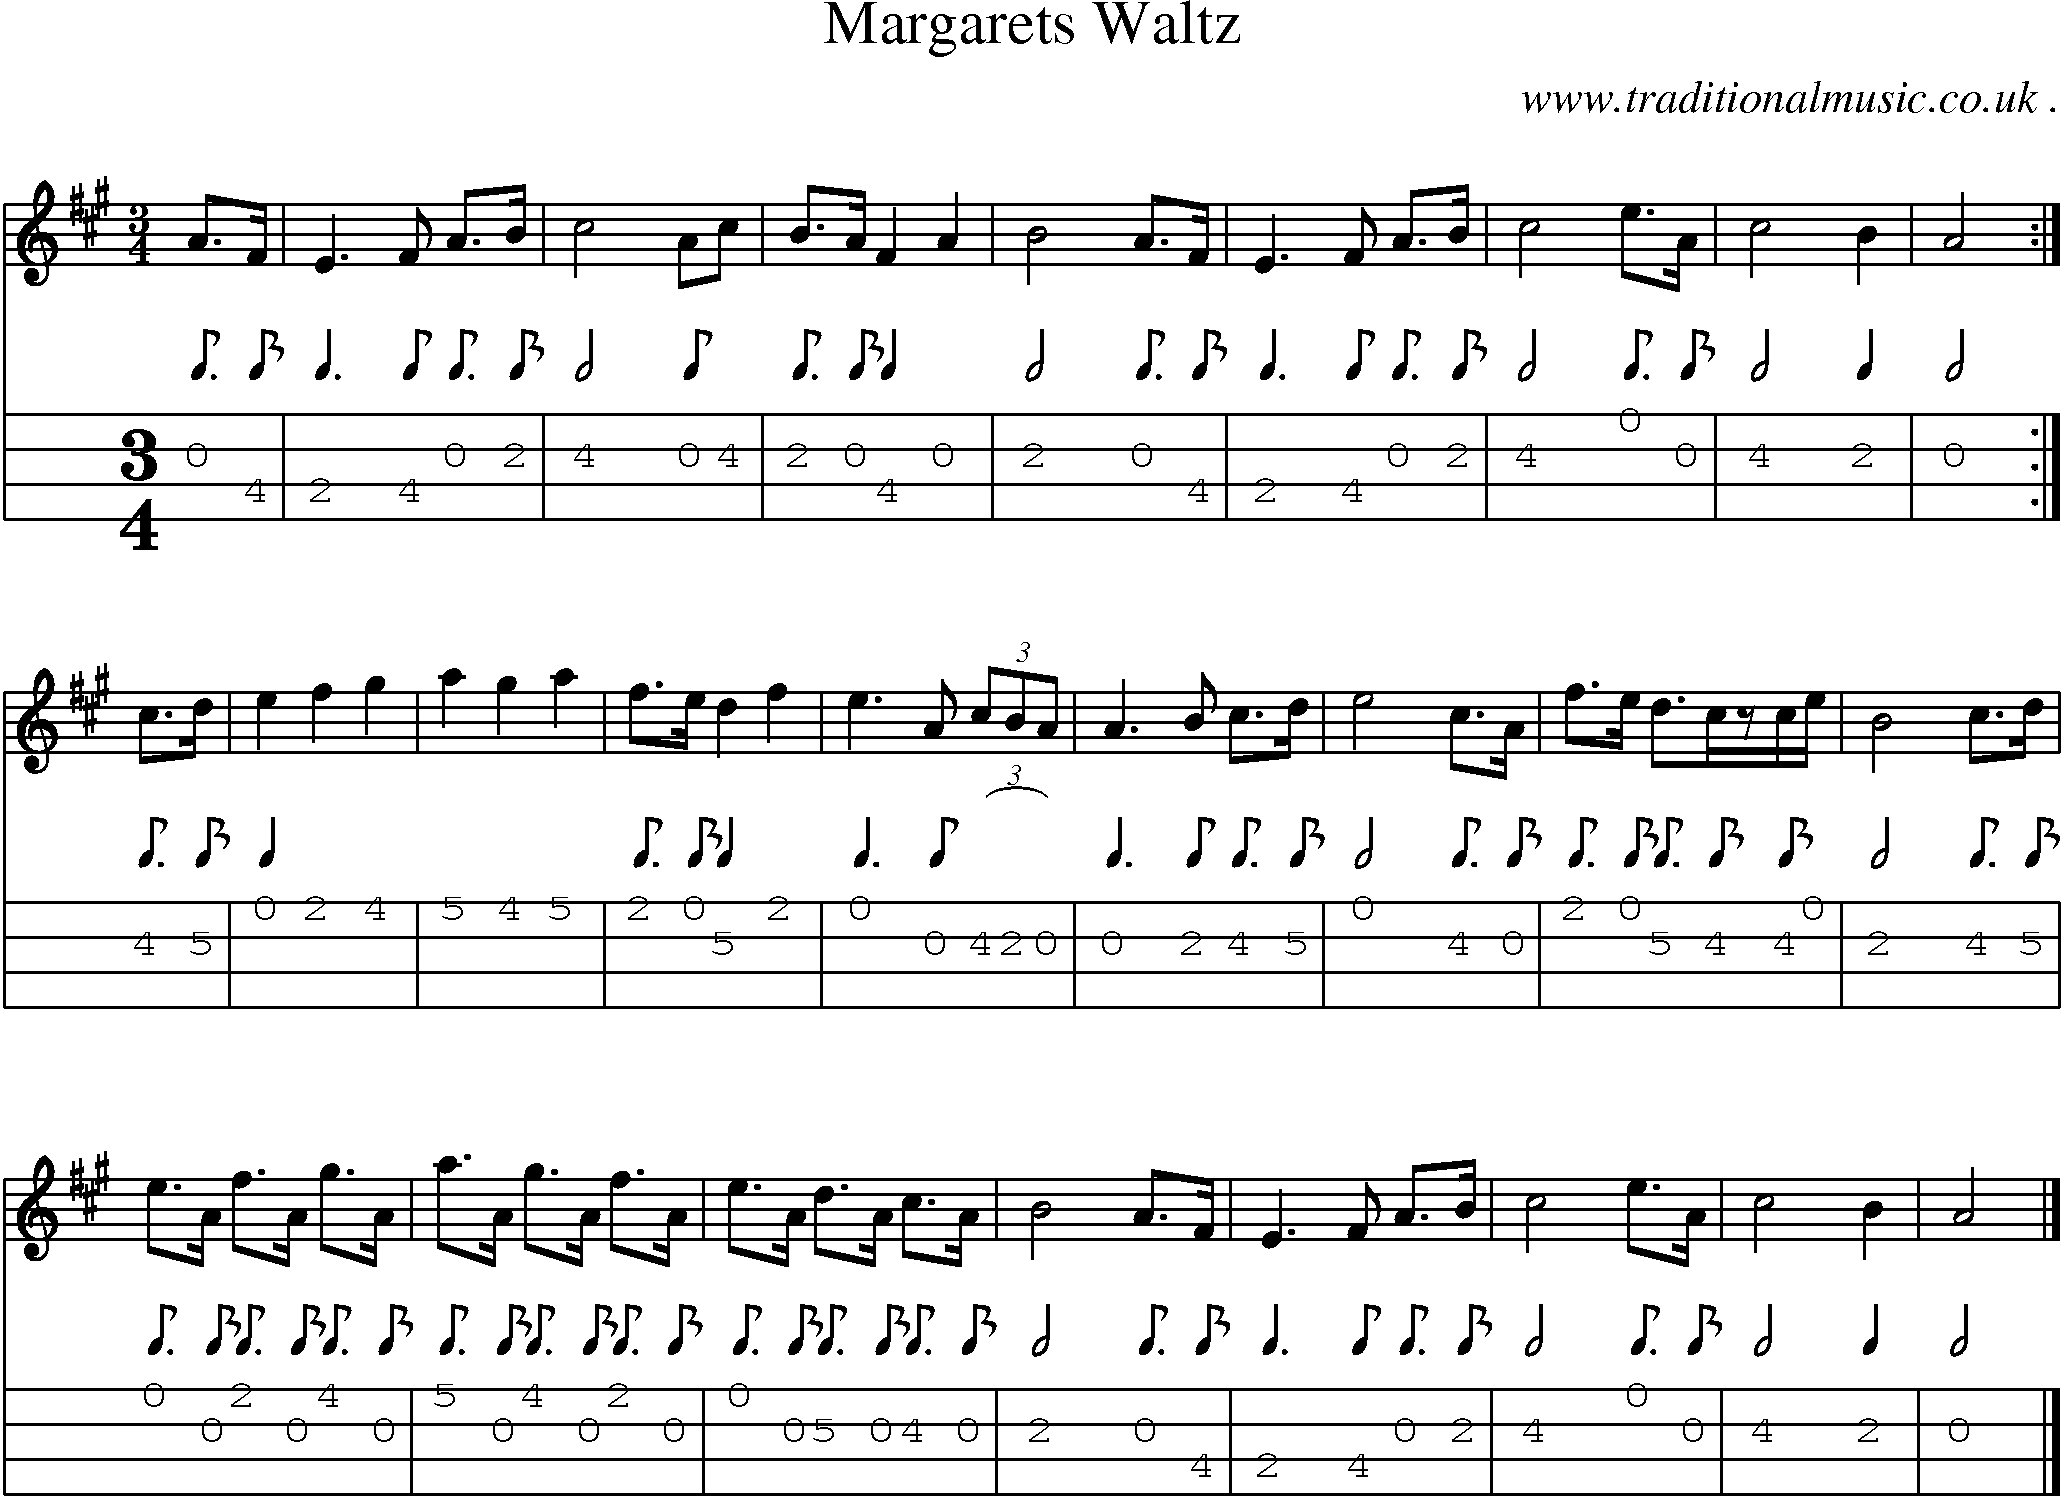 Sheet-music  score, Chords and Mandolin Tabs for Margarets Waltz